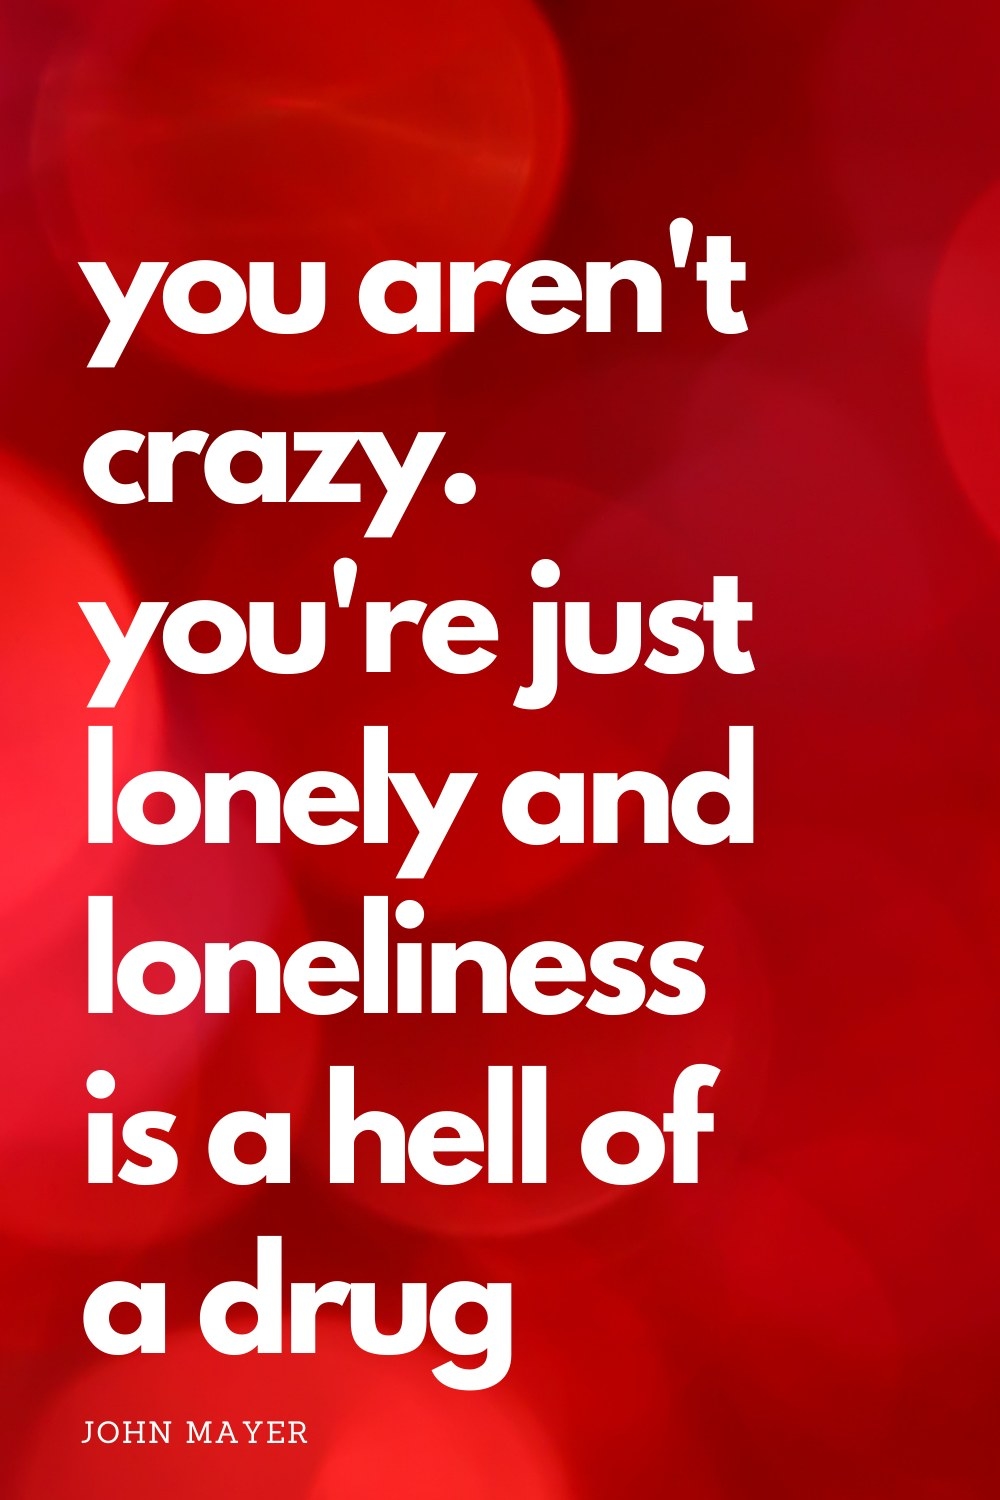 celebrity quote on loneliness